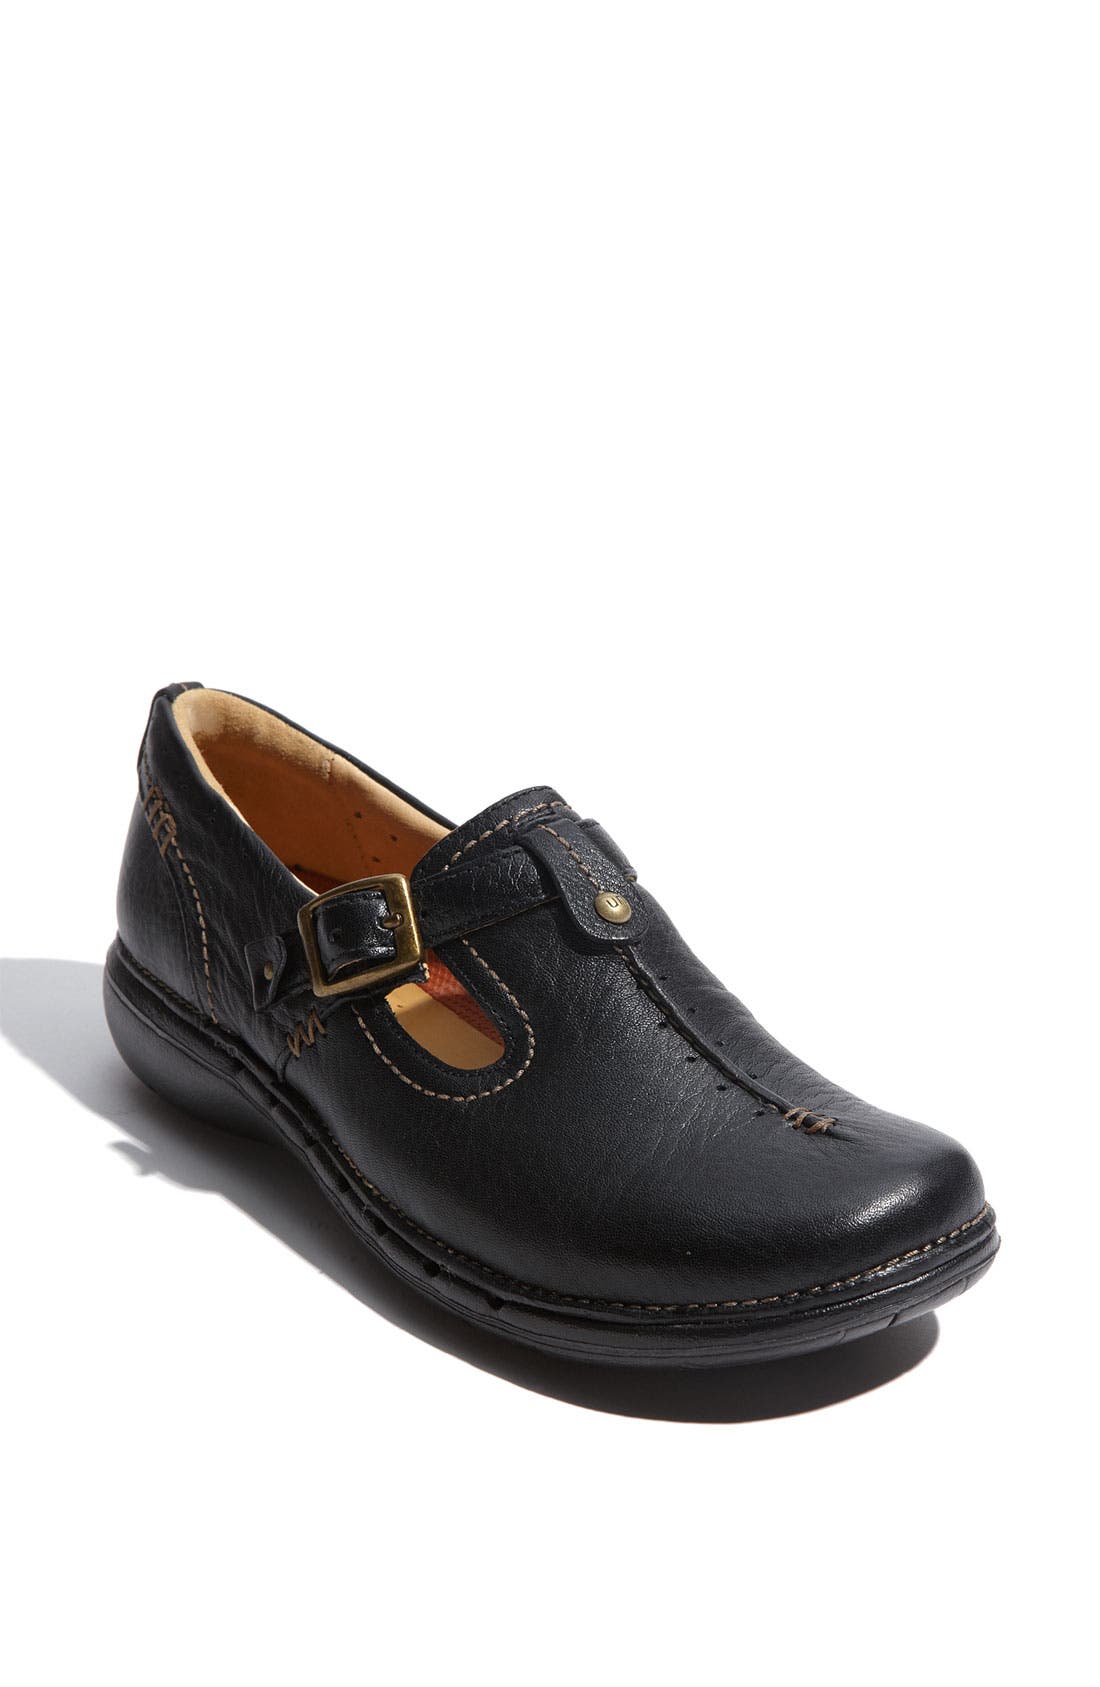 clarks womens unstructured shoes